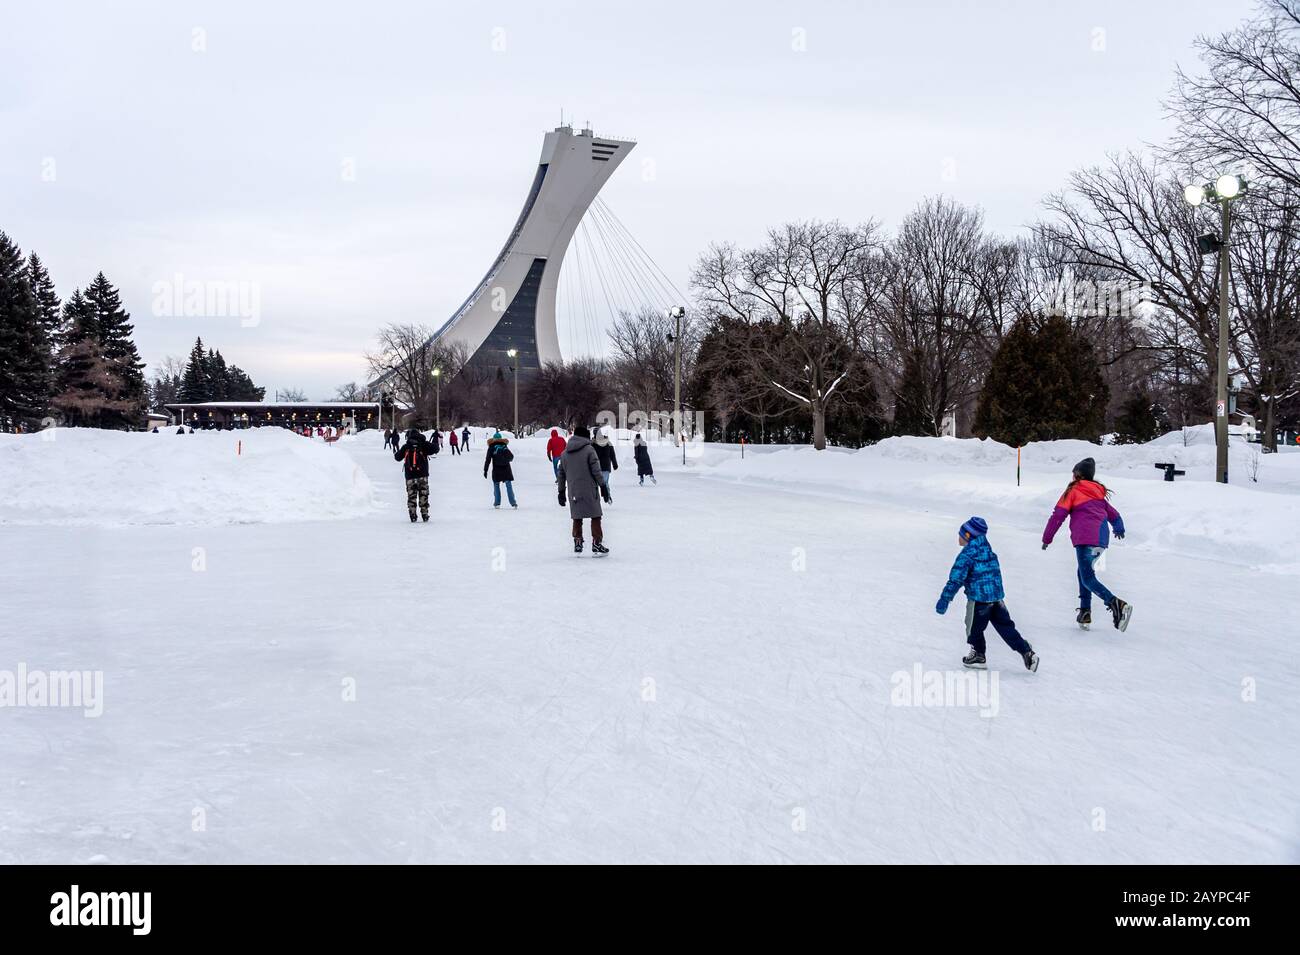 Montreal, CA - 15 February 2020: People  ice skating at the Park Maisonneuve ice rink with olympic Stadium Tower in background. Stock Photo